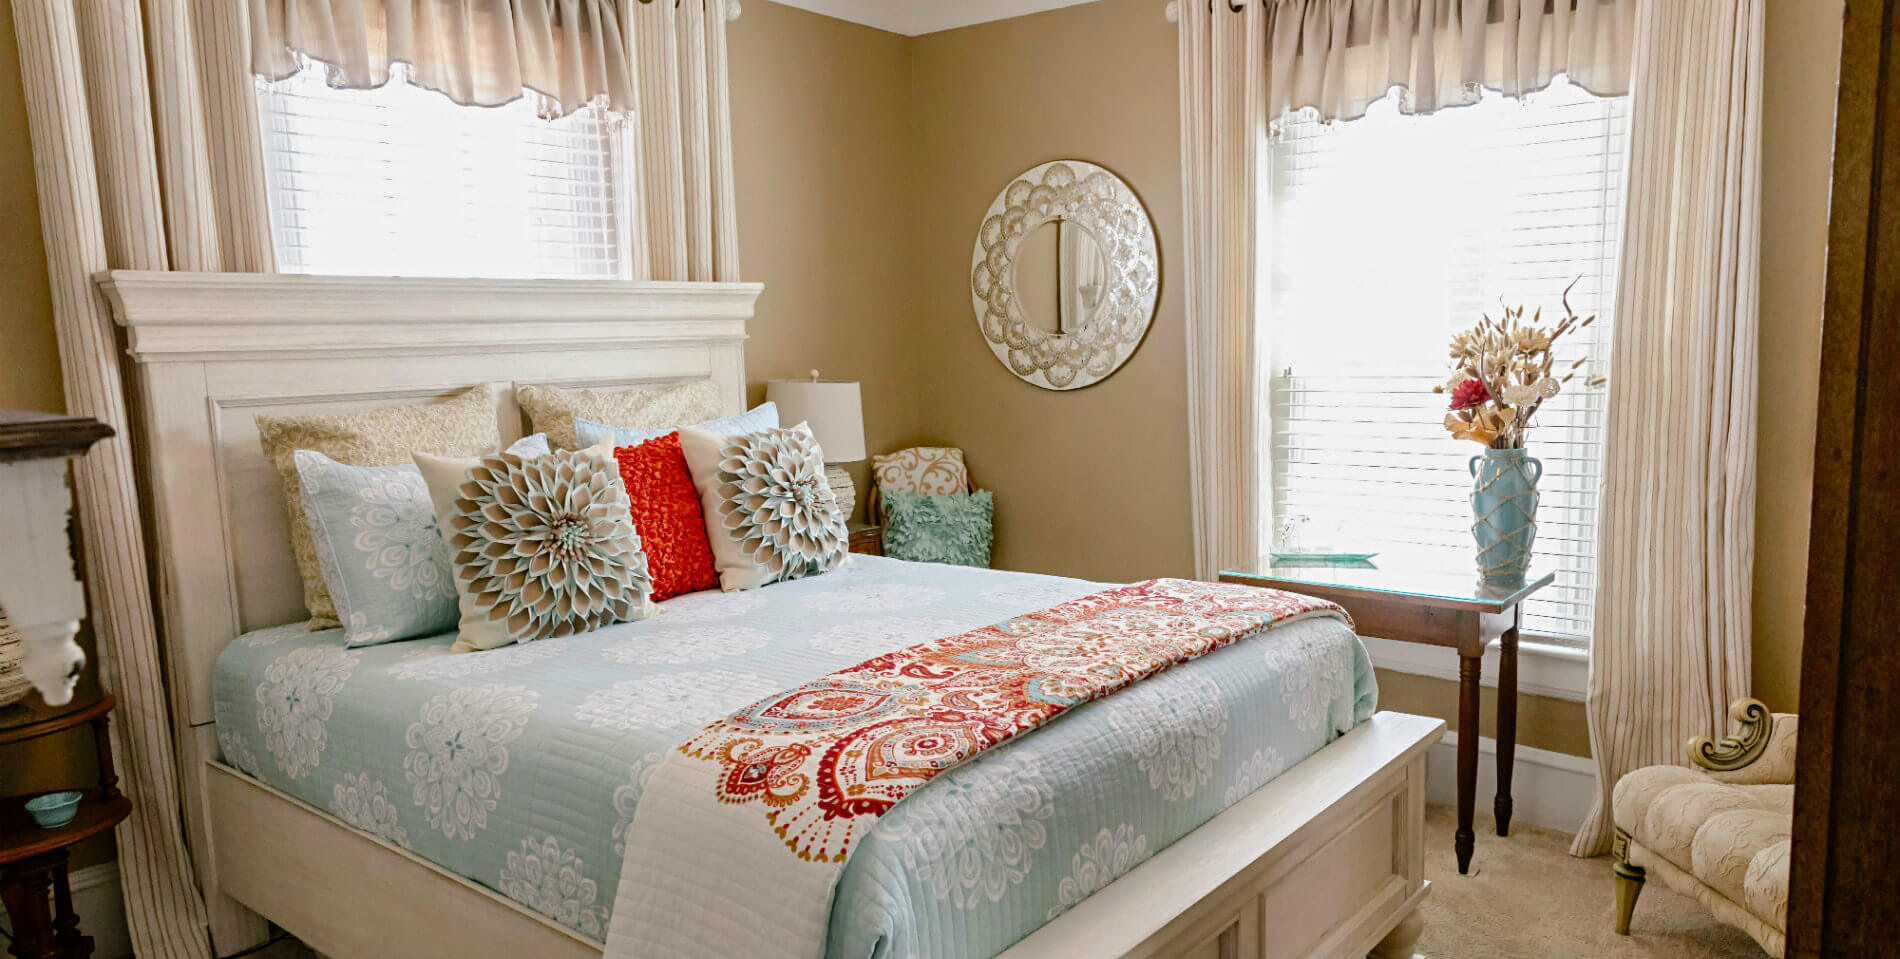 A bed with decorative throw pillows atop a white washed wooden bedframe in the Georgie Wilson room. 